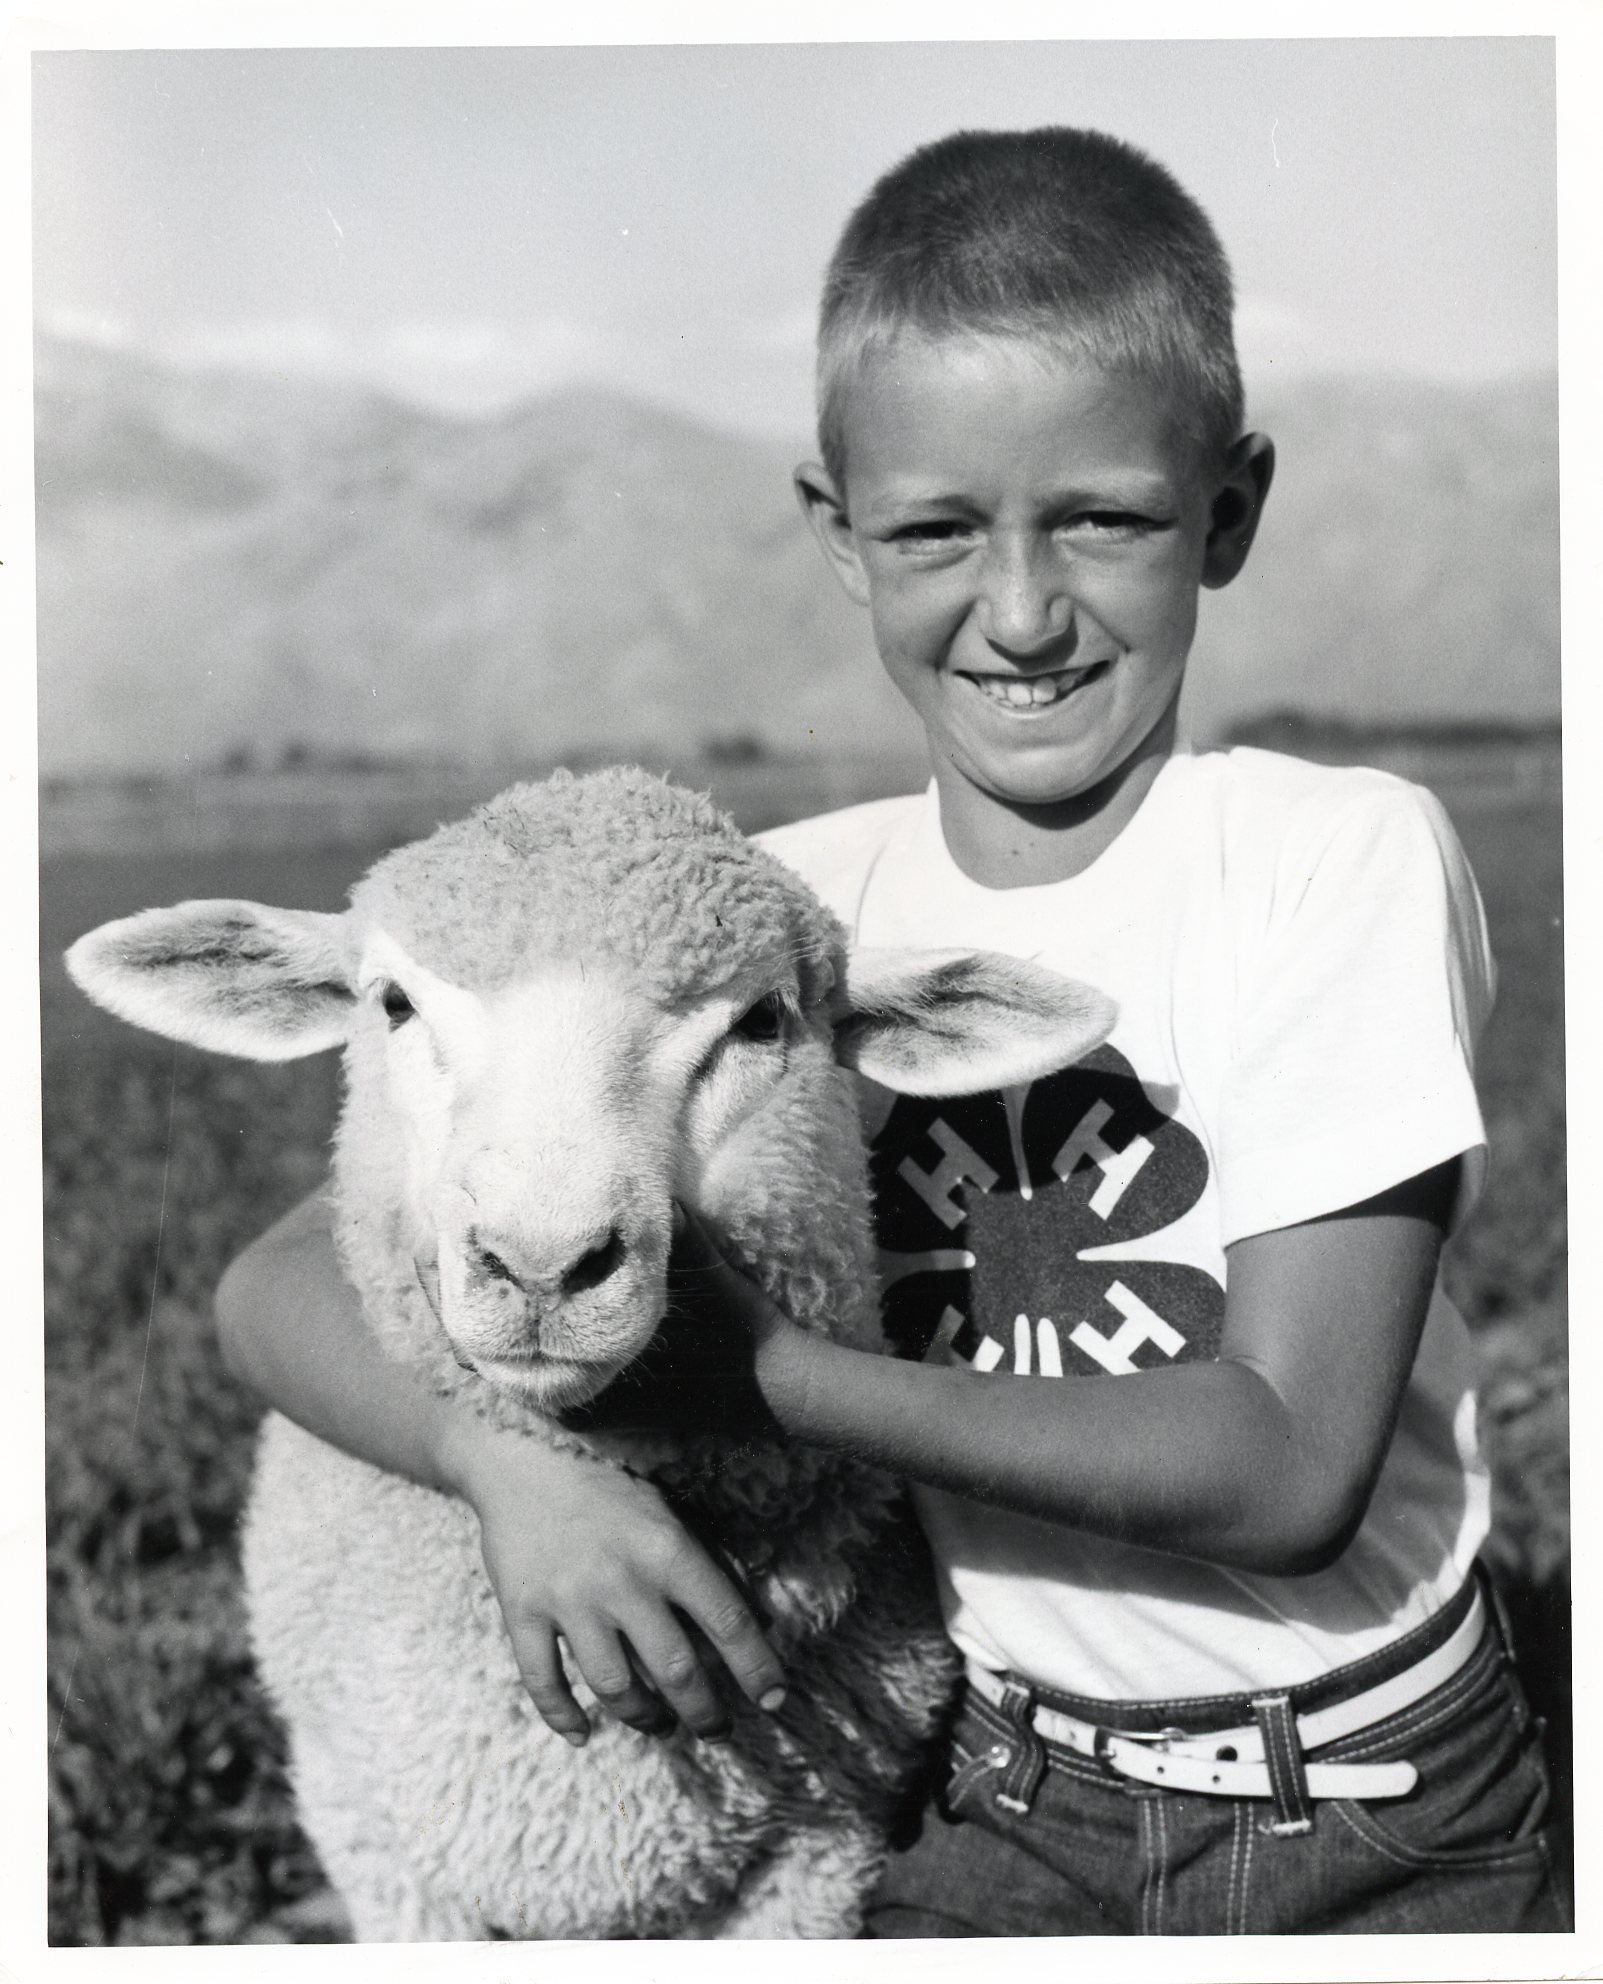 Preview image for a boy and his sheep